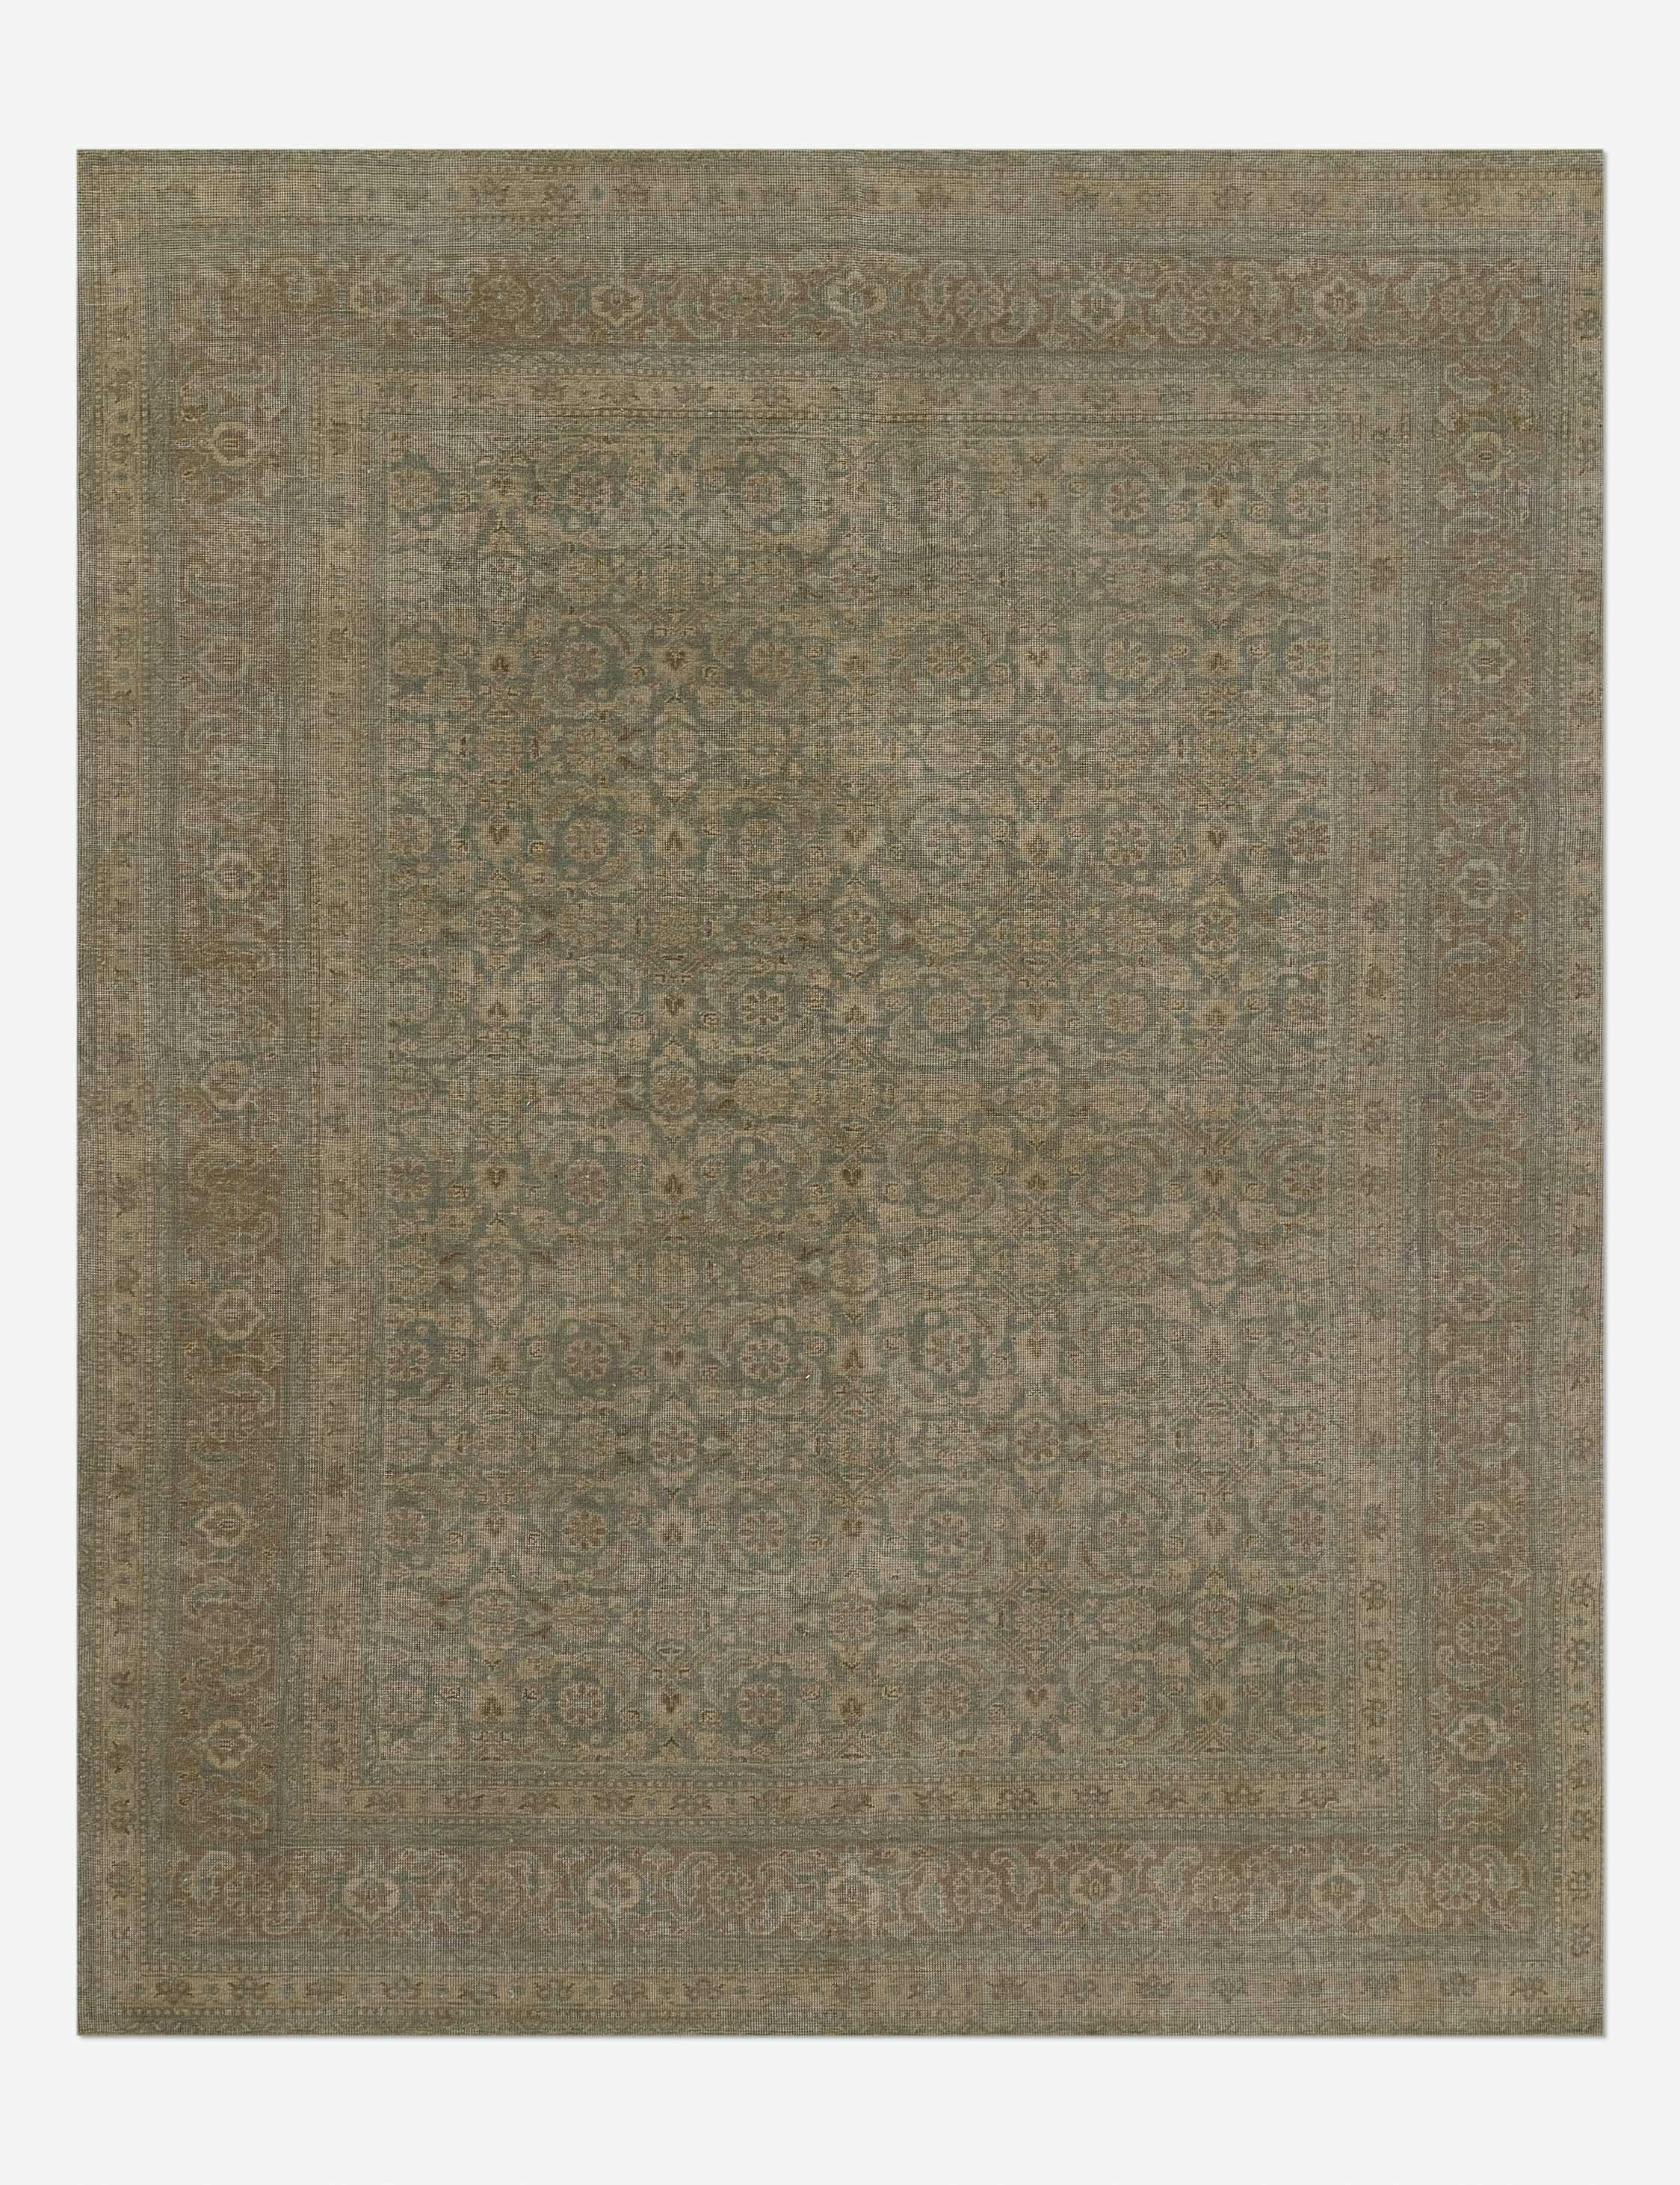 Menorca Vintage Charm Hand-Knotted Wool Rug - Blue, 10' x 14'